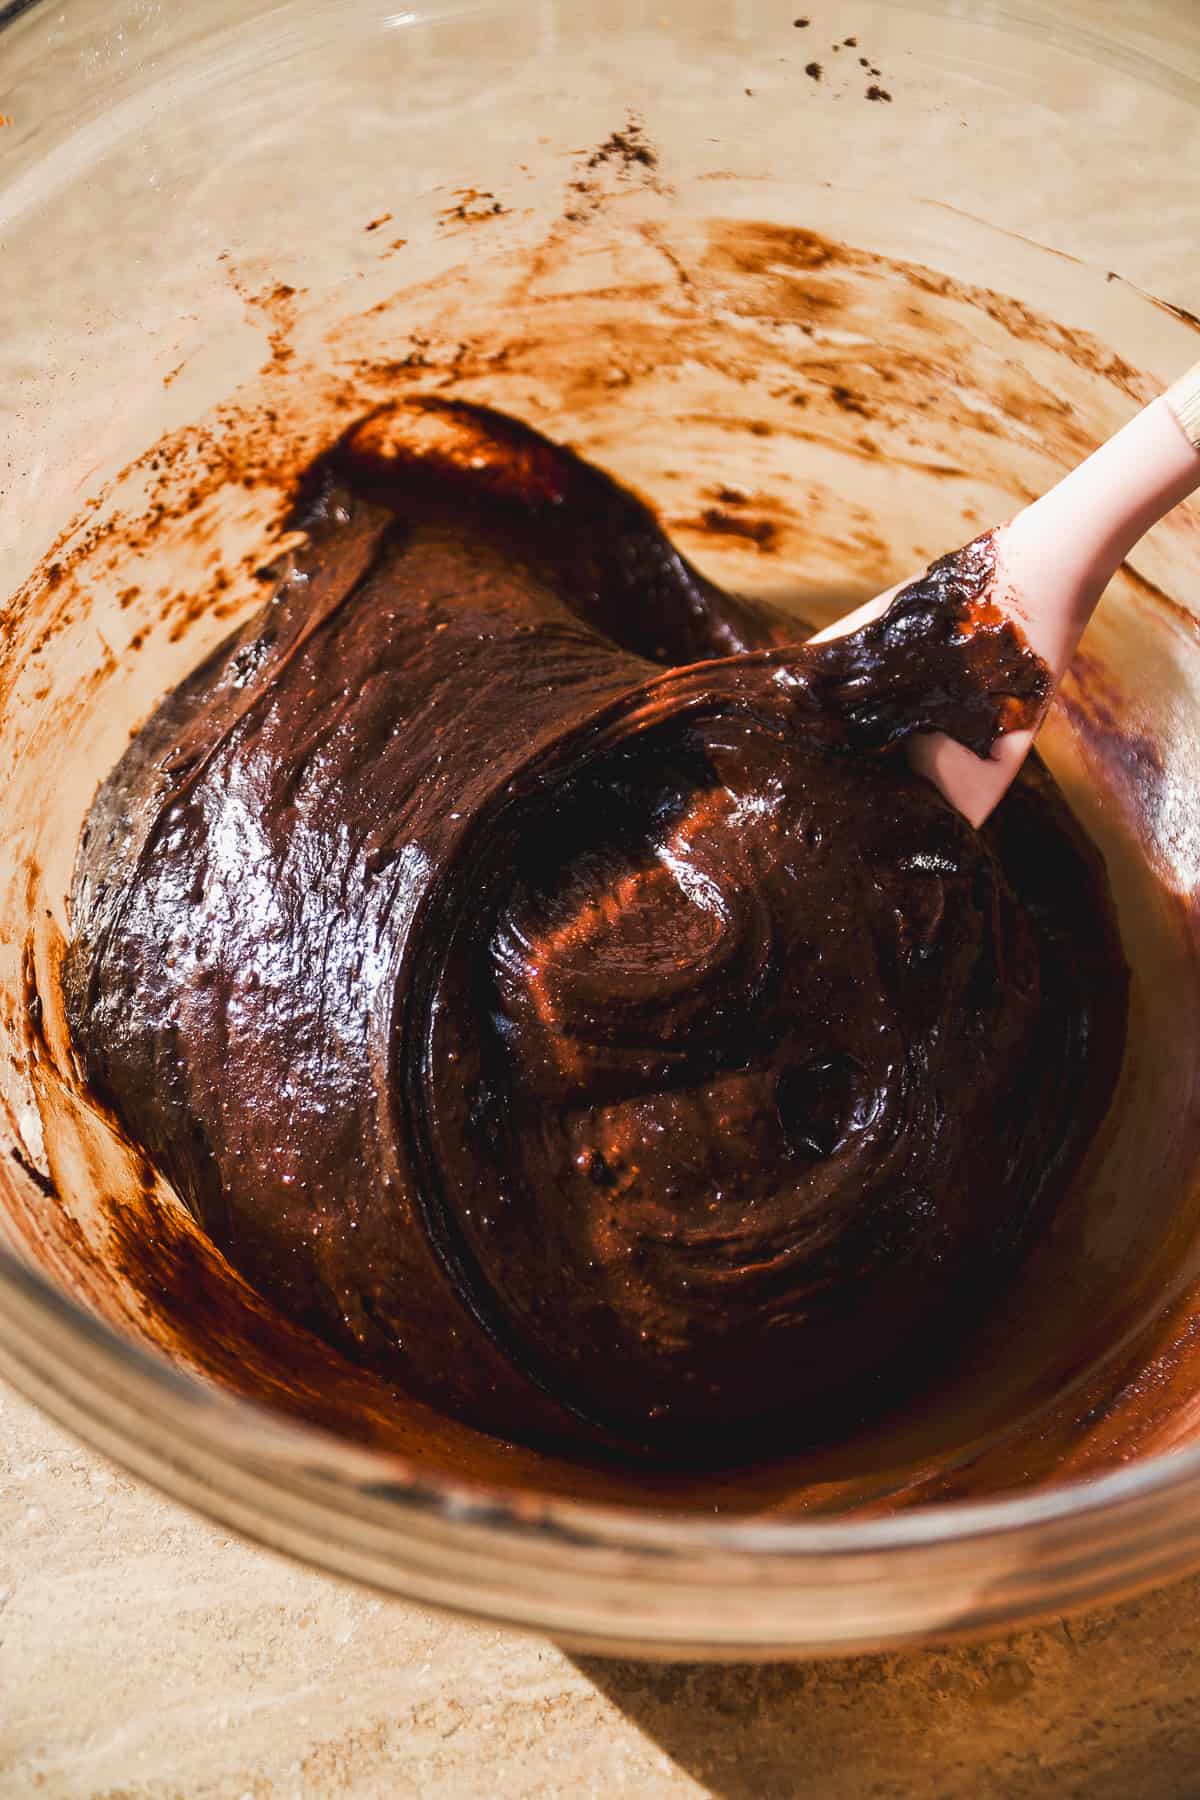 Flourless chocolate cake batter in a glass bowl with a spatula.